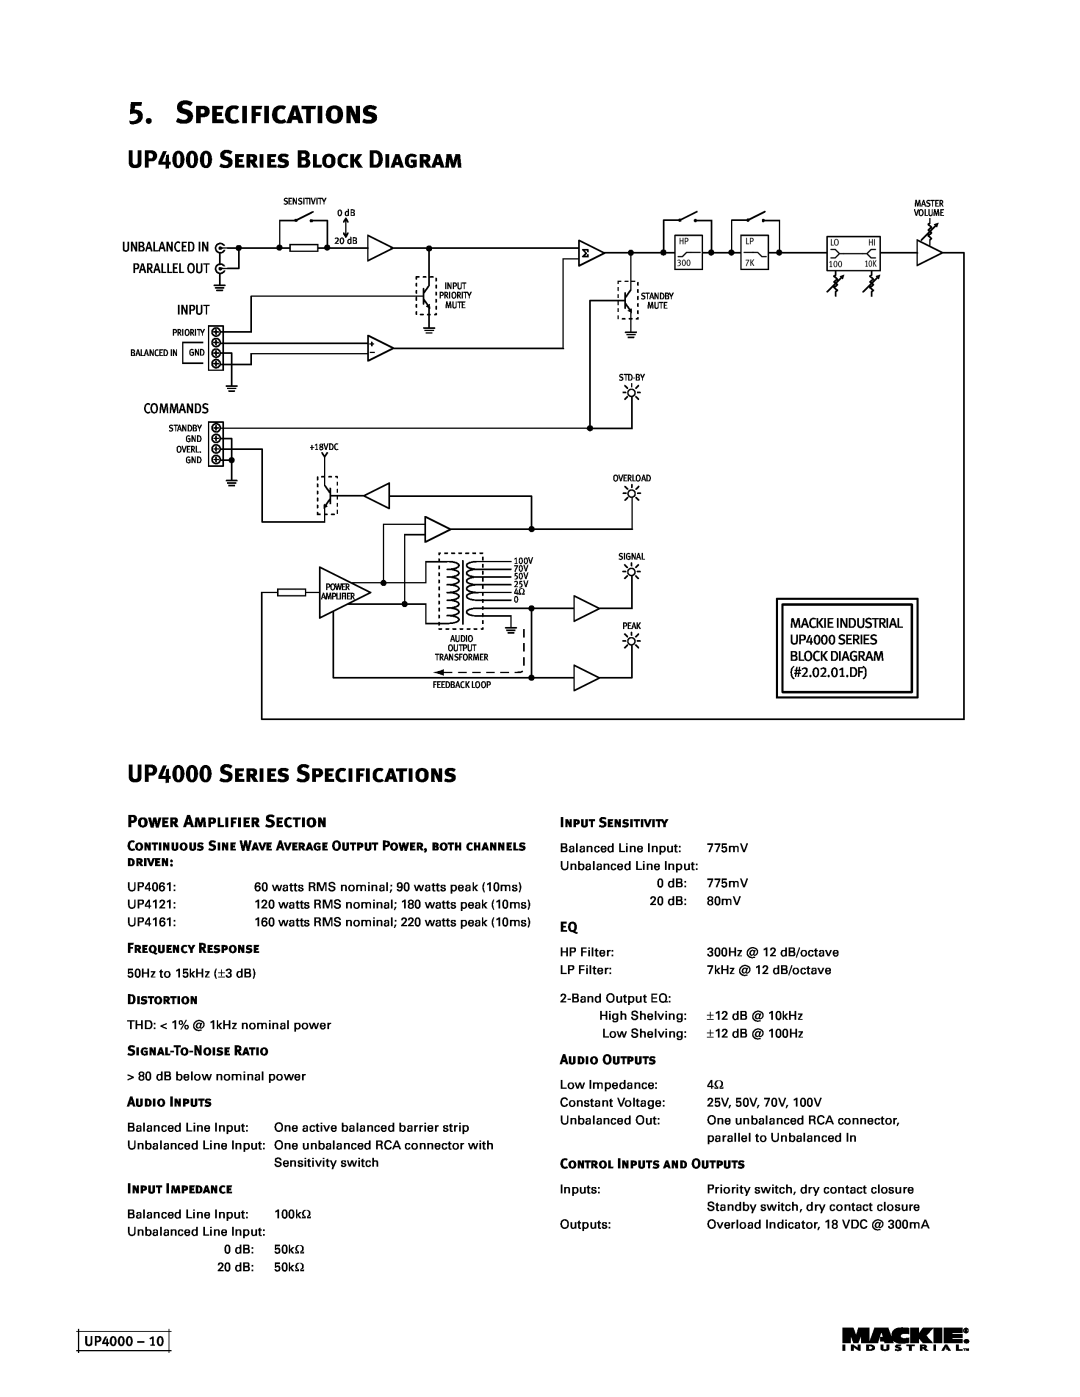 Mackie UP4121, UP4161, UP4061 UP4000 Series Block Diagram, UP4000 Series Specifications, Power Amplifier Section 